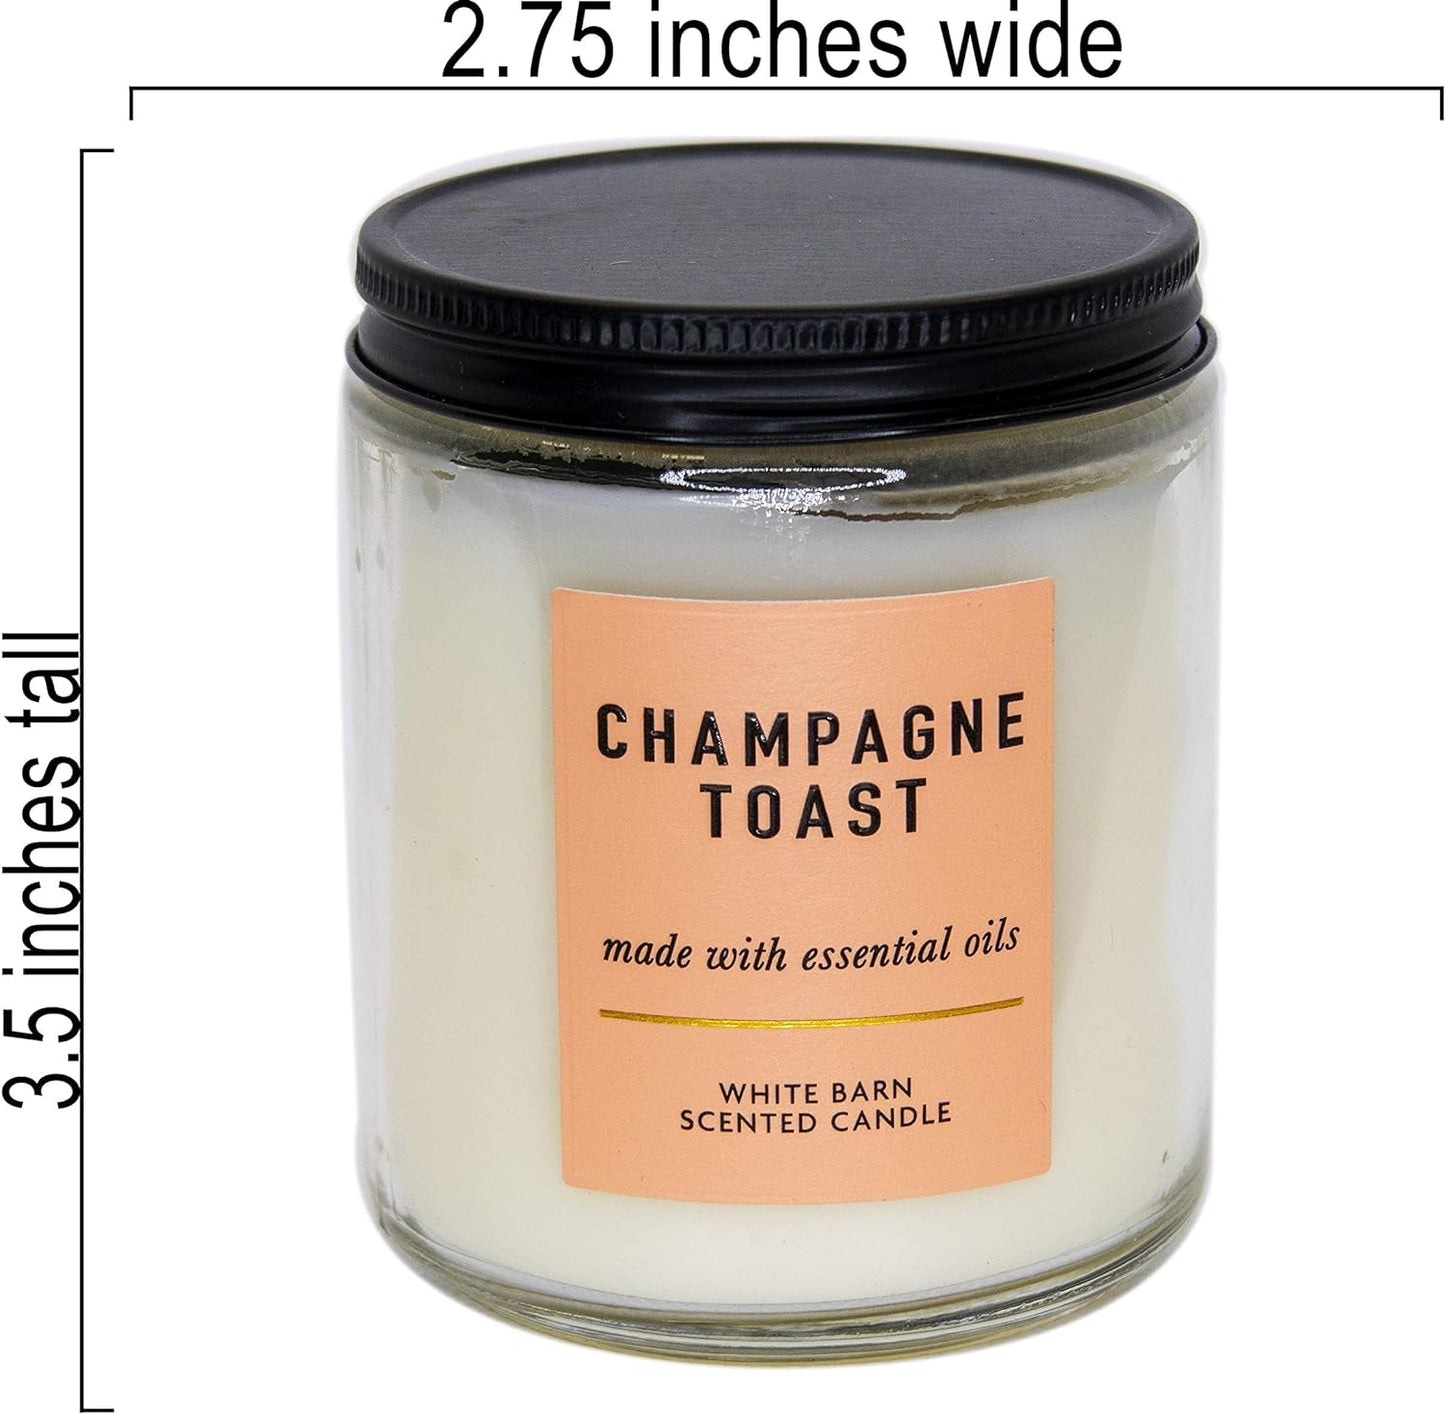 Bath & Body Works Single Wick Scented Candle Champagne Toast (Champagne Toast) Packaging Varies